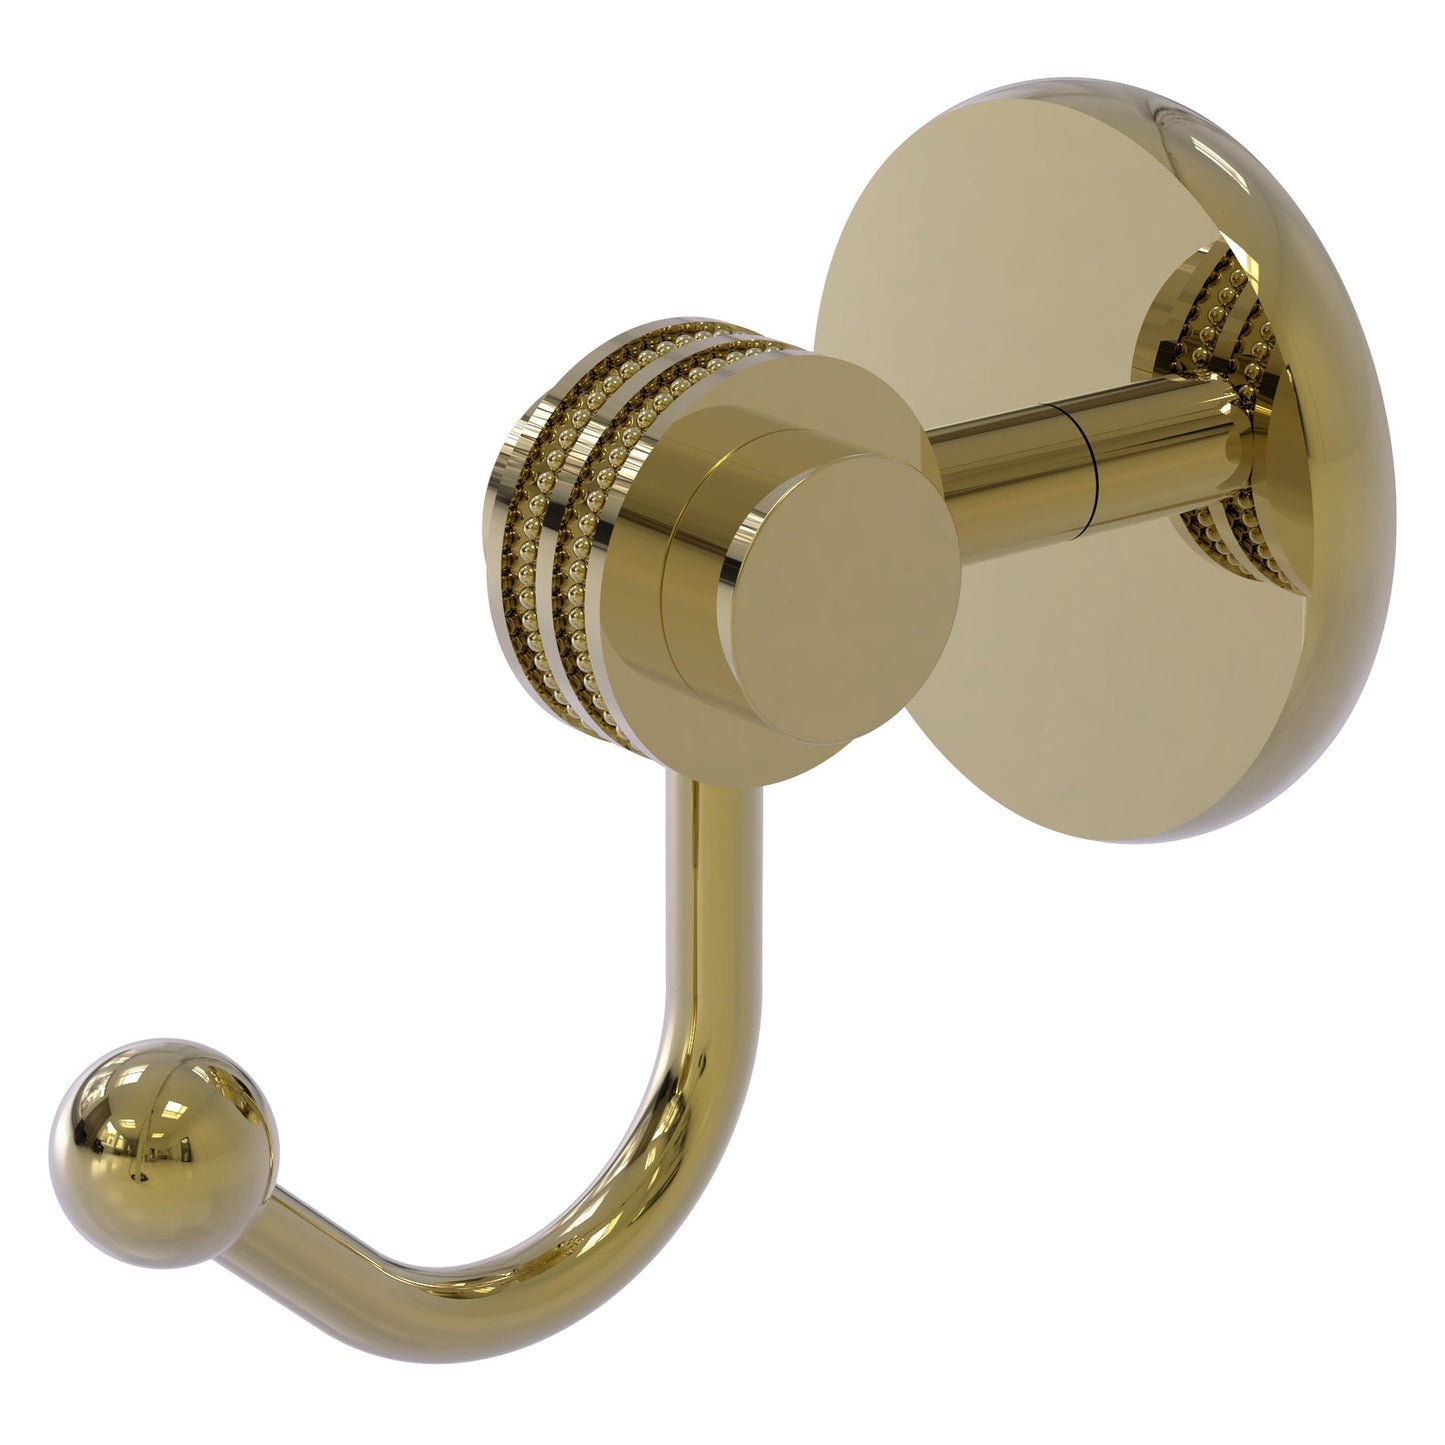 Allied Brass Satellite Orbit Two 2.77" x 4.54" Unlacquered Brass Solid Brass Robe Hook With Dotted Accents